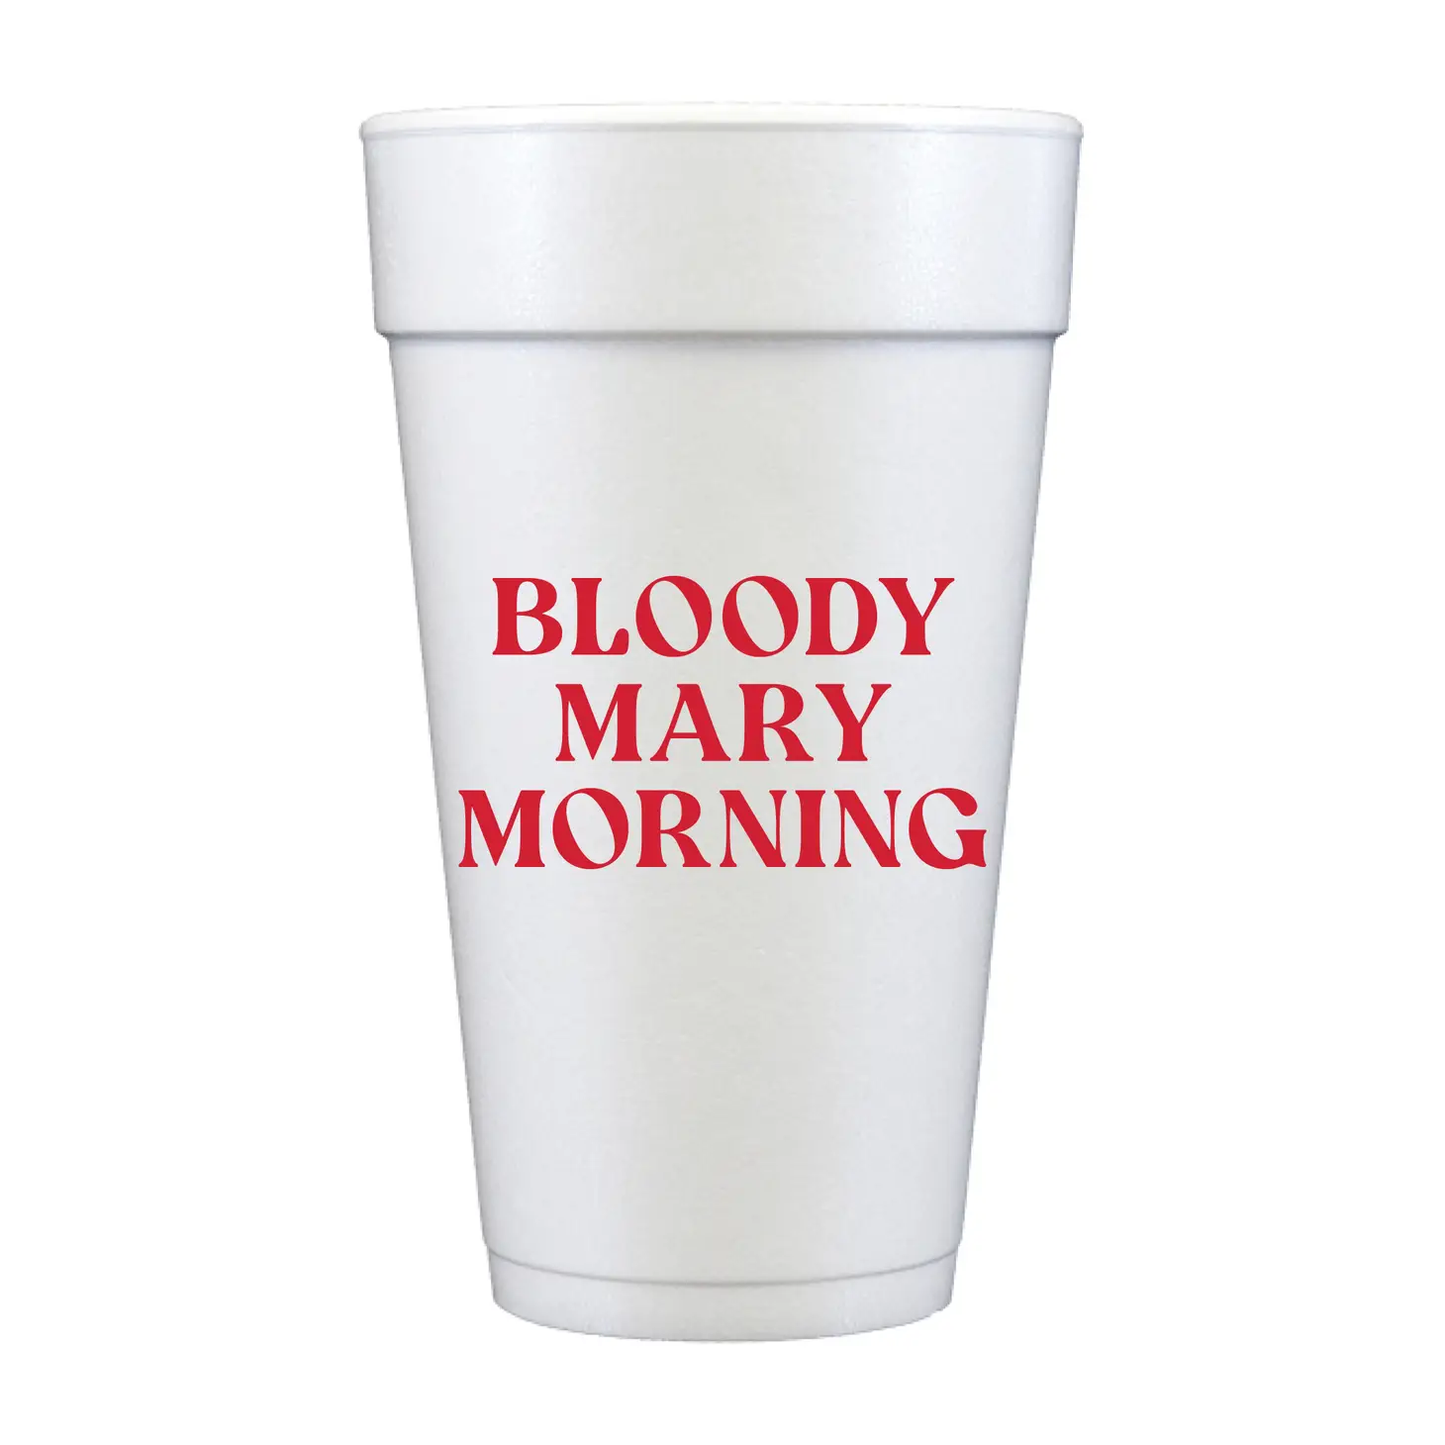 "Bloody Mary Morning" Styros | Pack of 10